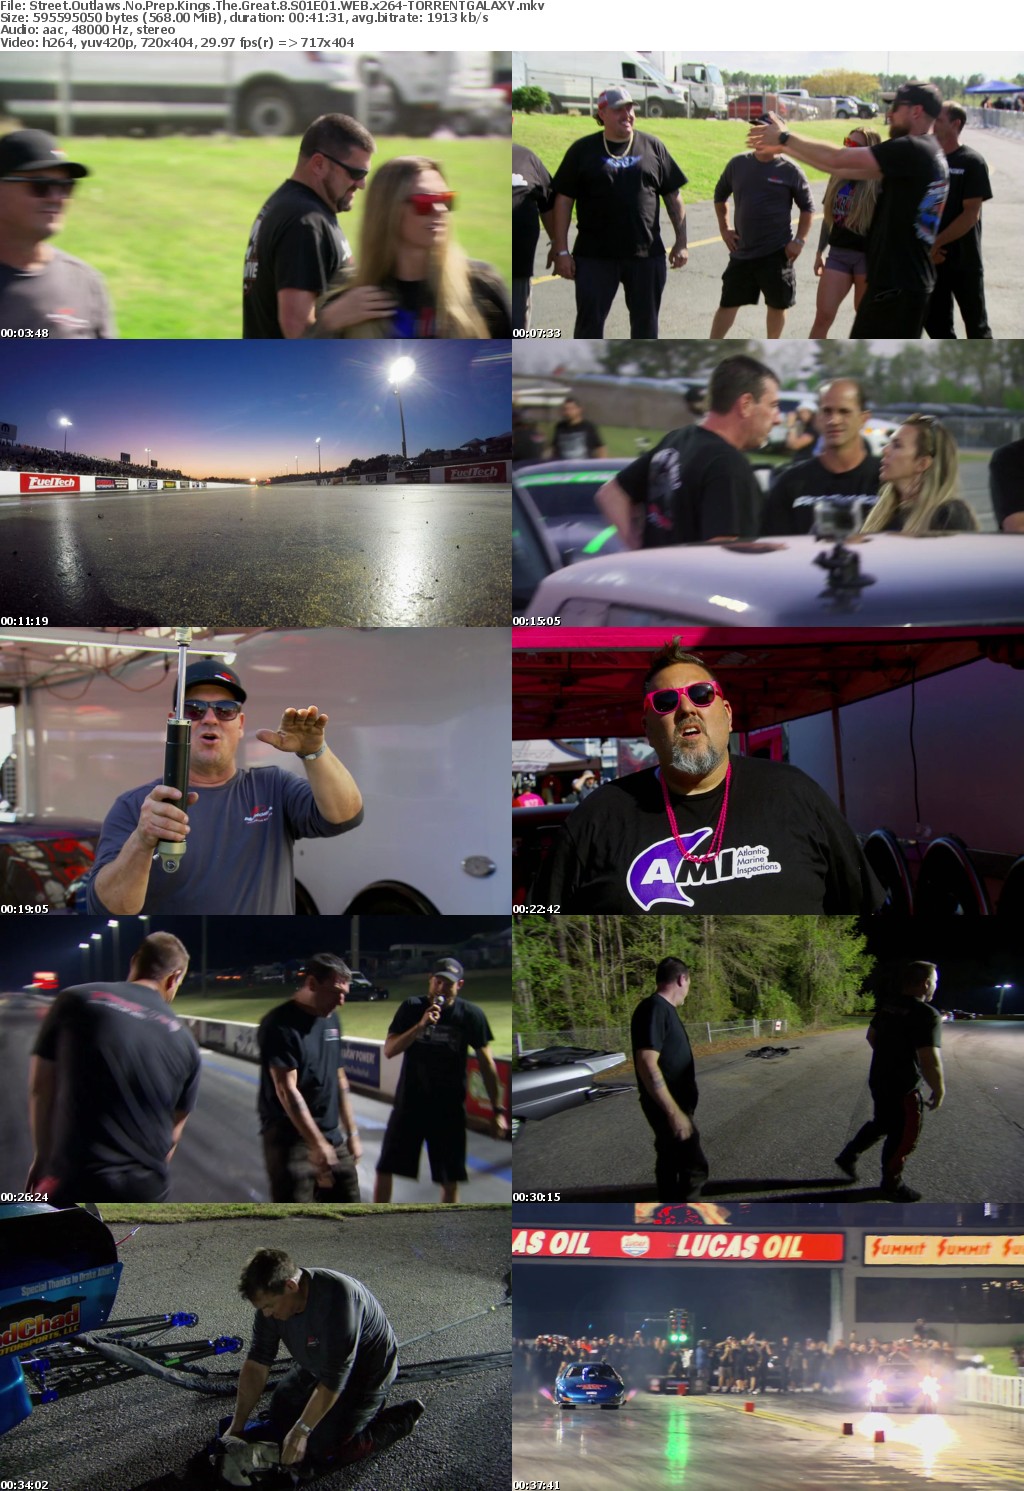 Street Outlaws No Prep Kings The Great 8 S01E01 WEB x264-GALAXY